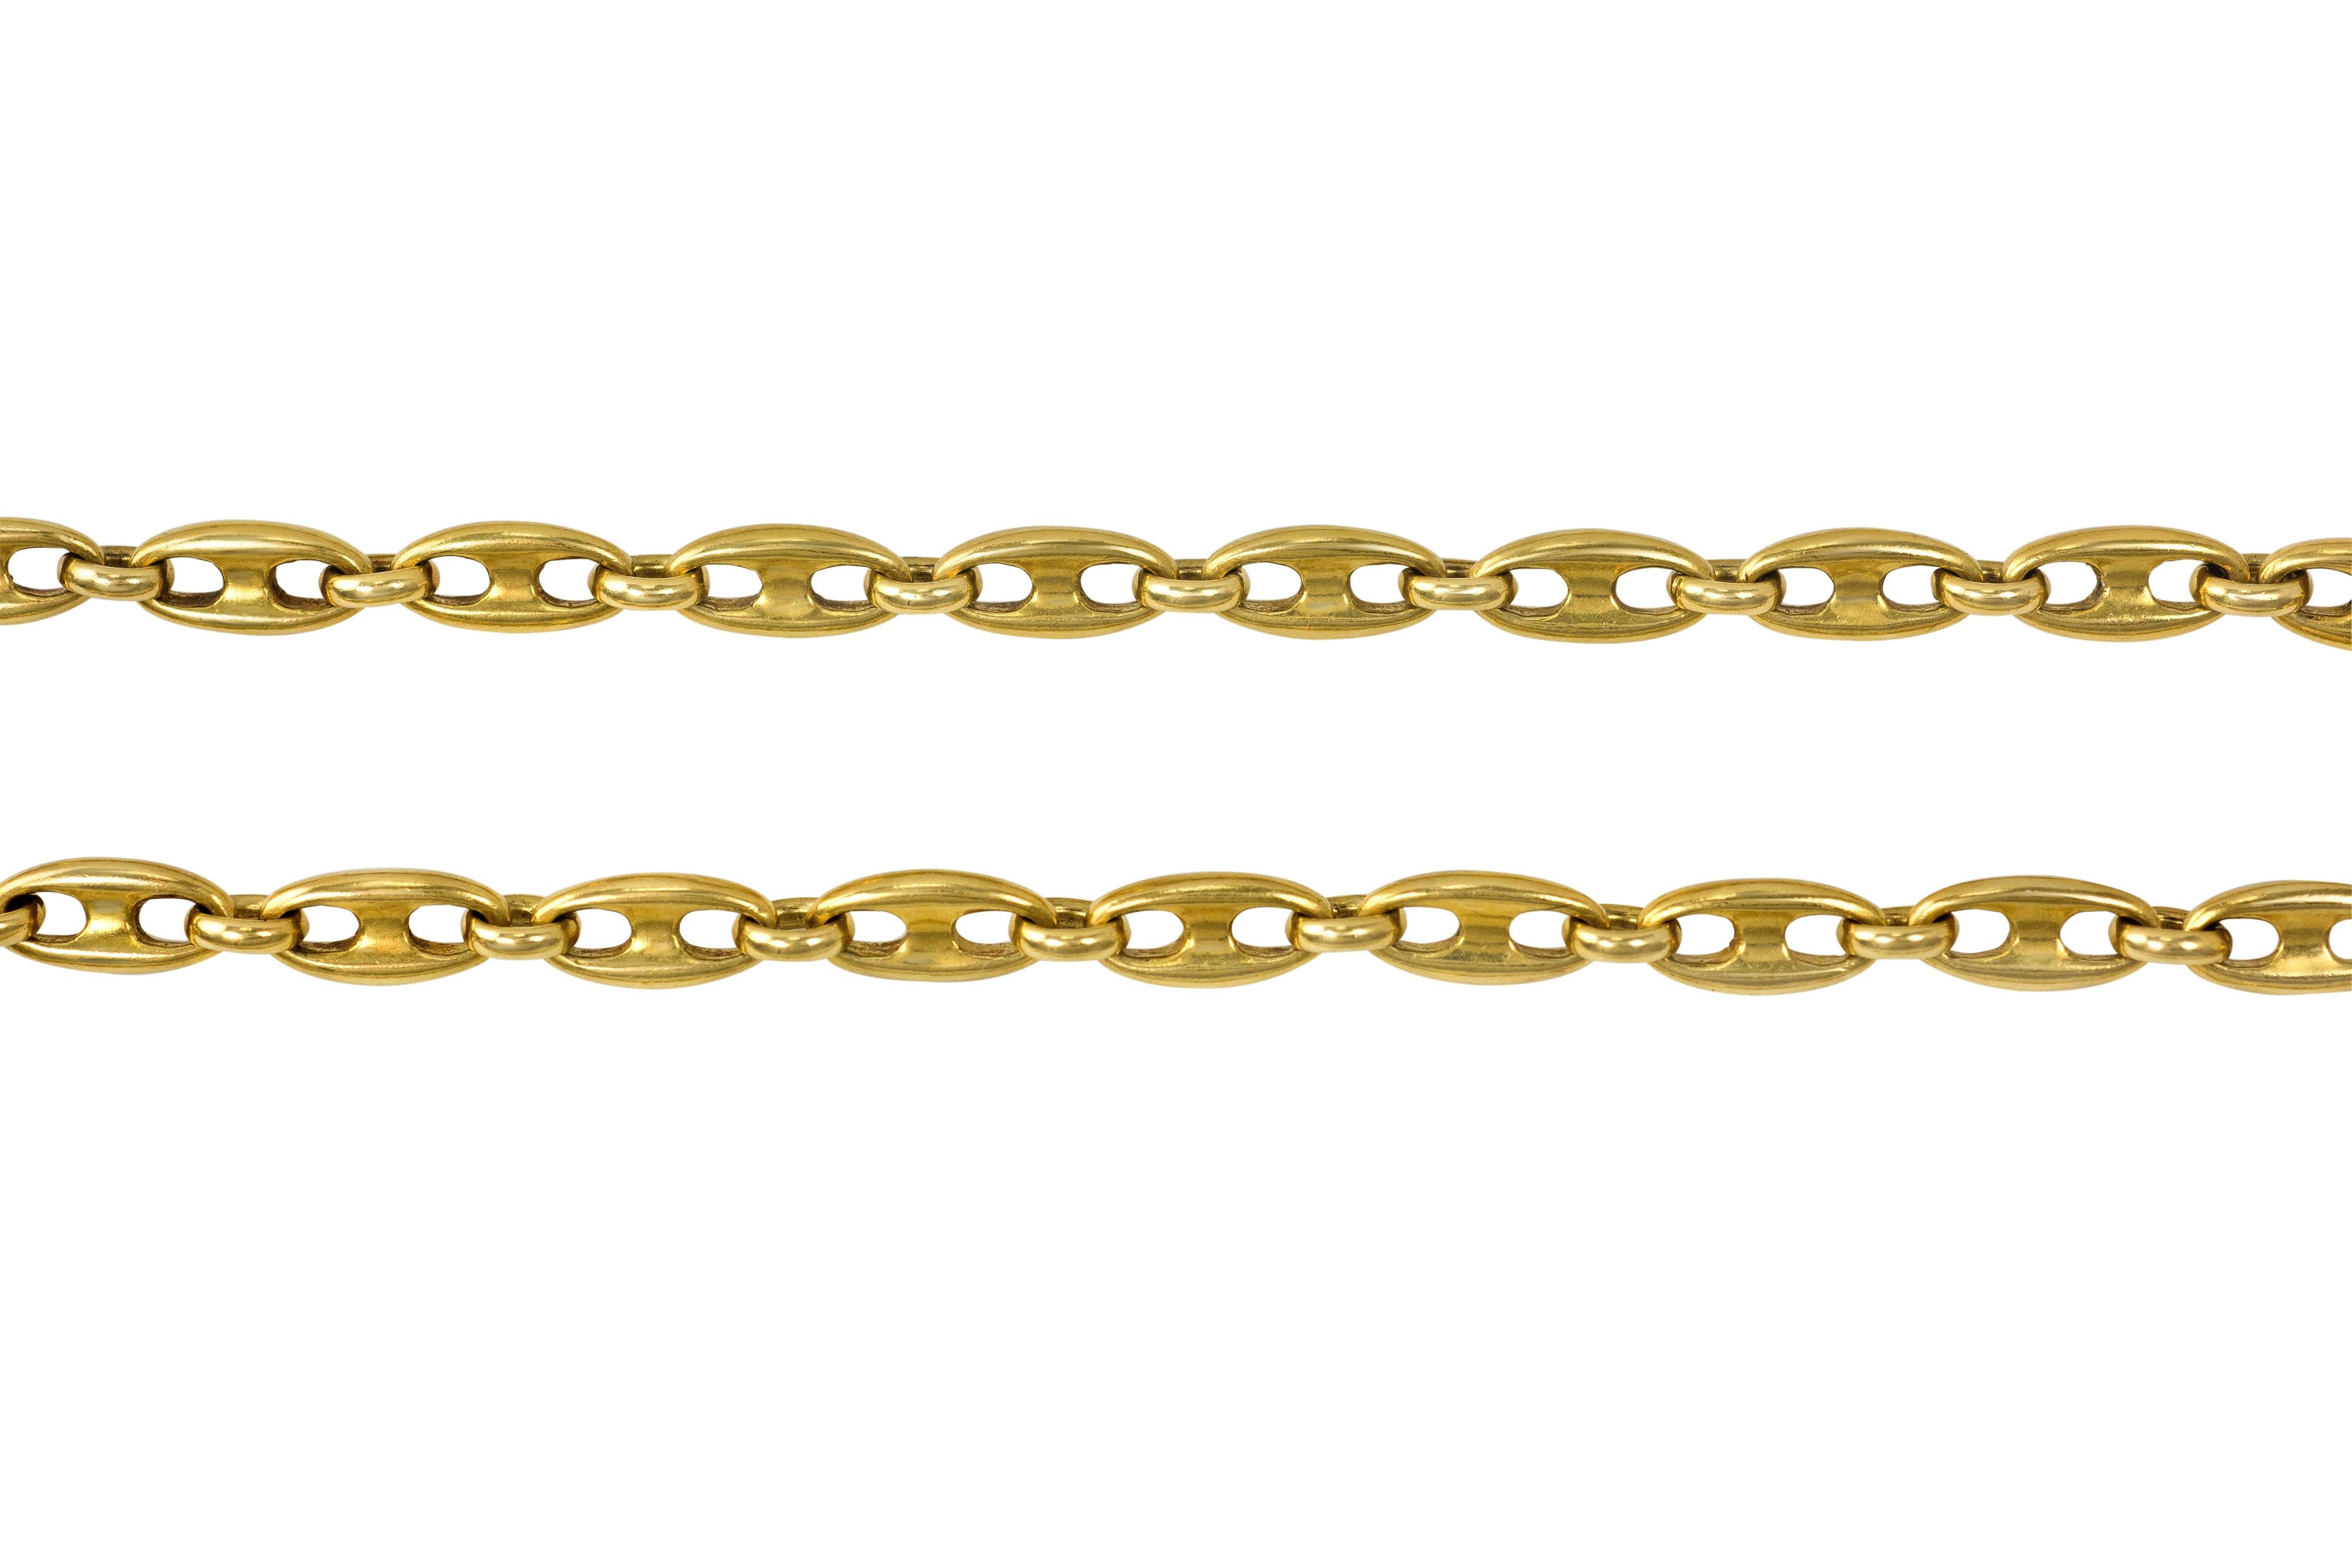 An 18 karat gold Gucci-style link chain, by Van Cleef & Arpels. 

The chain can be worn alone, long or doubled, and can easily accommodate a pendant. Signed VCA, numbered, and stamped with makers mark for VCA.